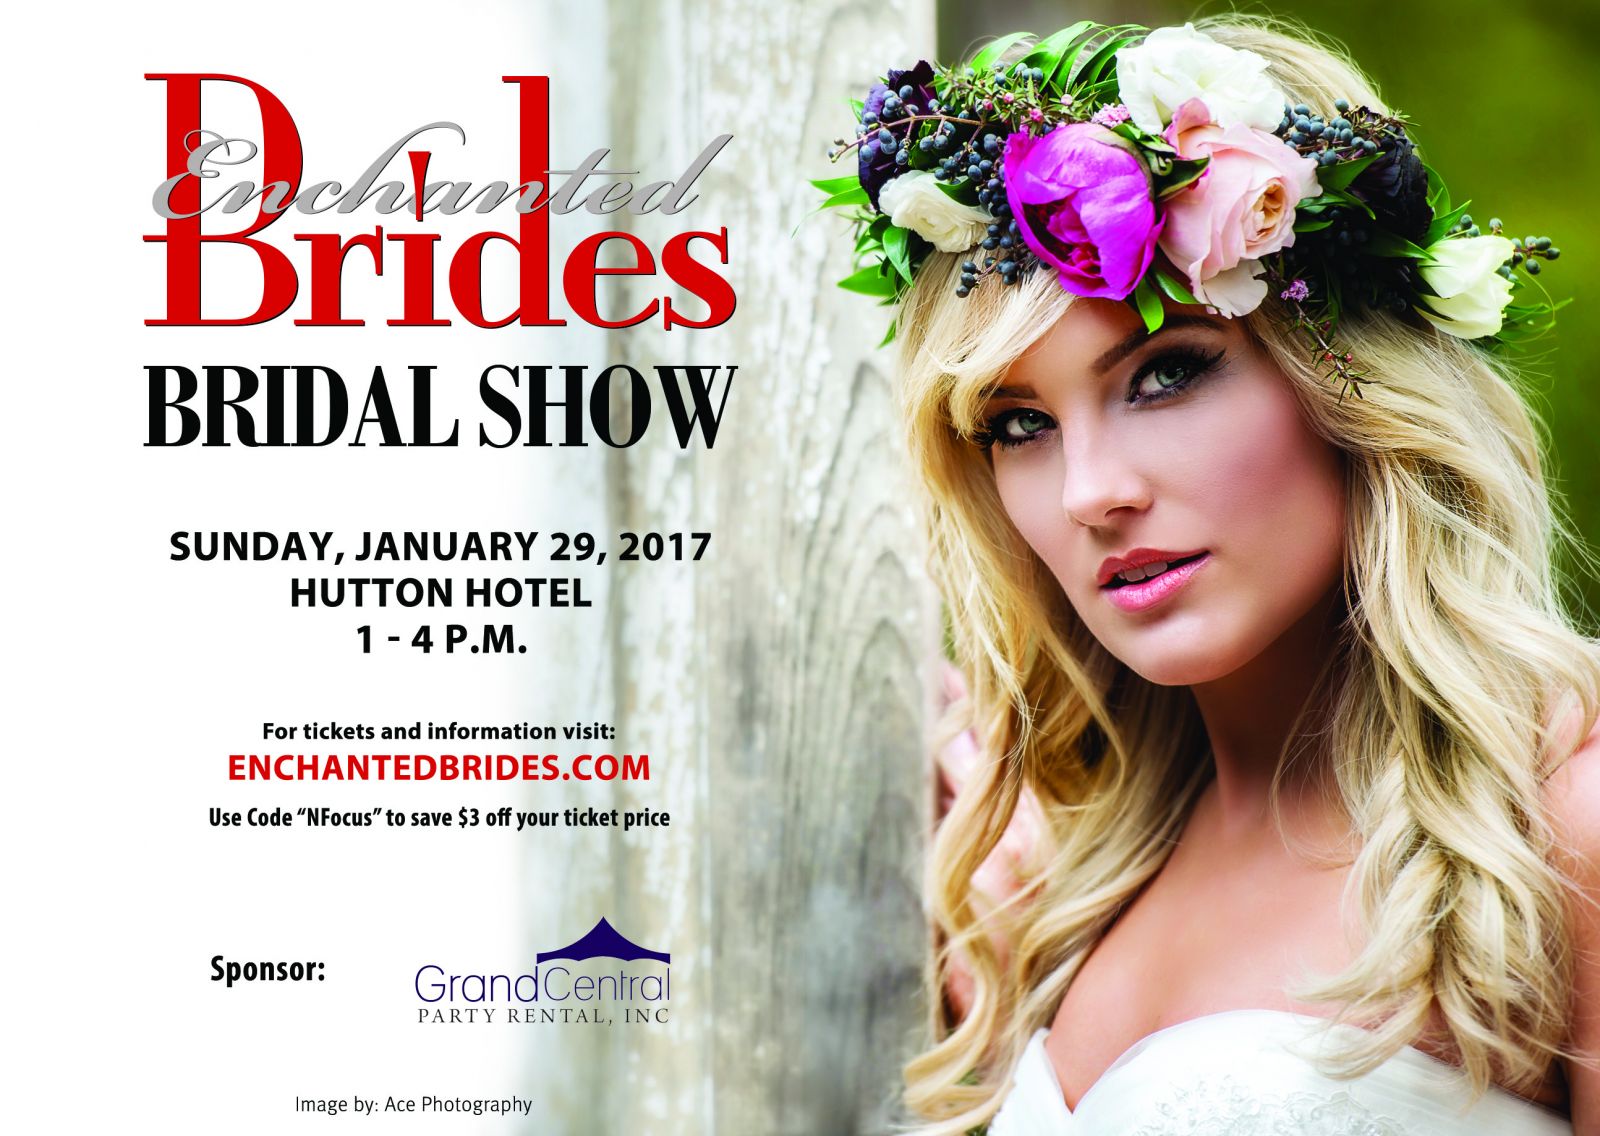 Enchanted Brides Bridal Show in Nashville at The Hutton Hotel on